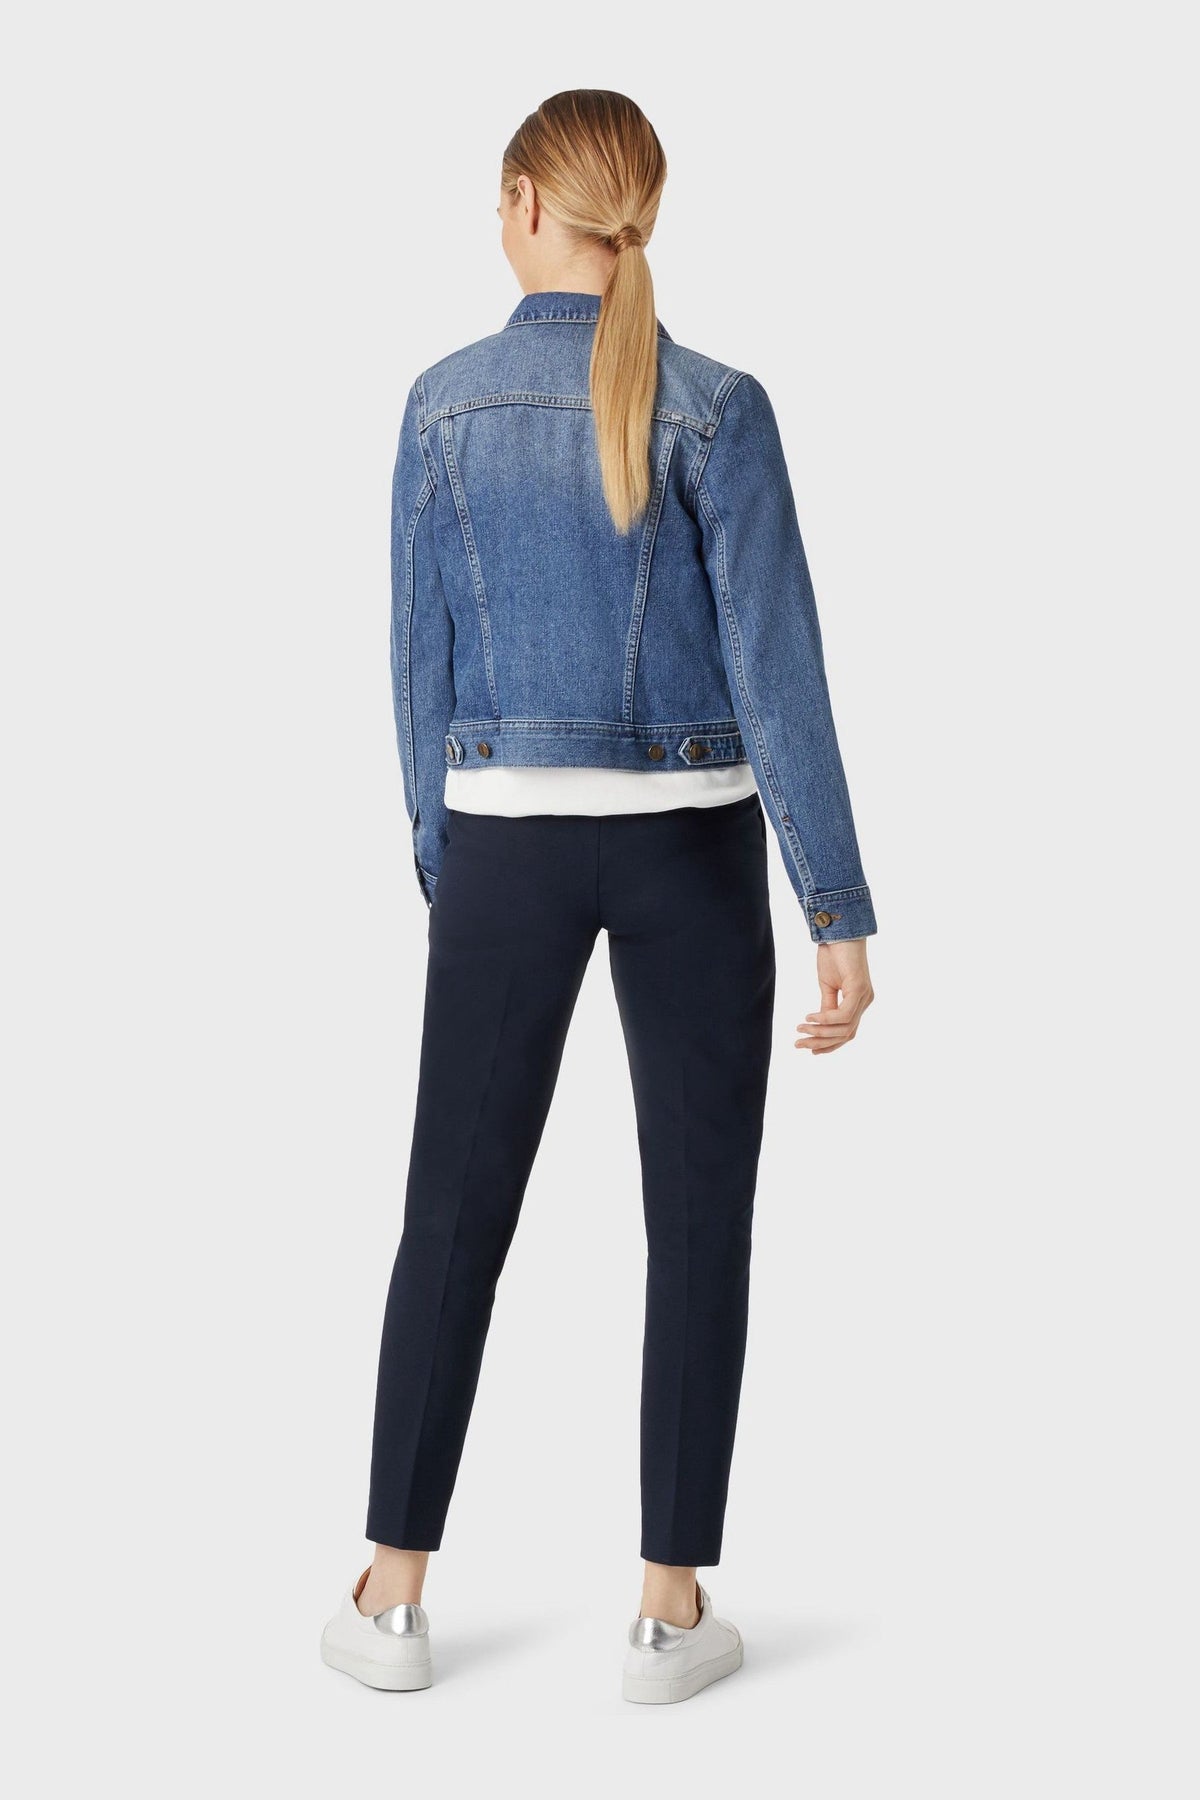 Hobbs Blue Mariam Jacket  - Front View - Available in Sizes L